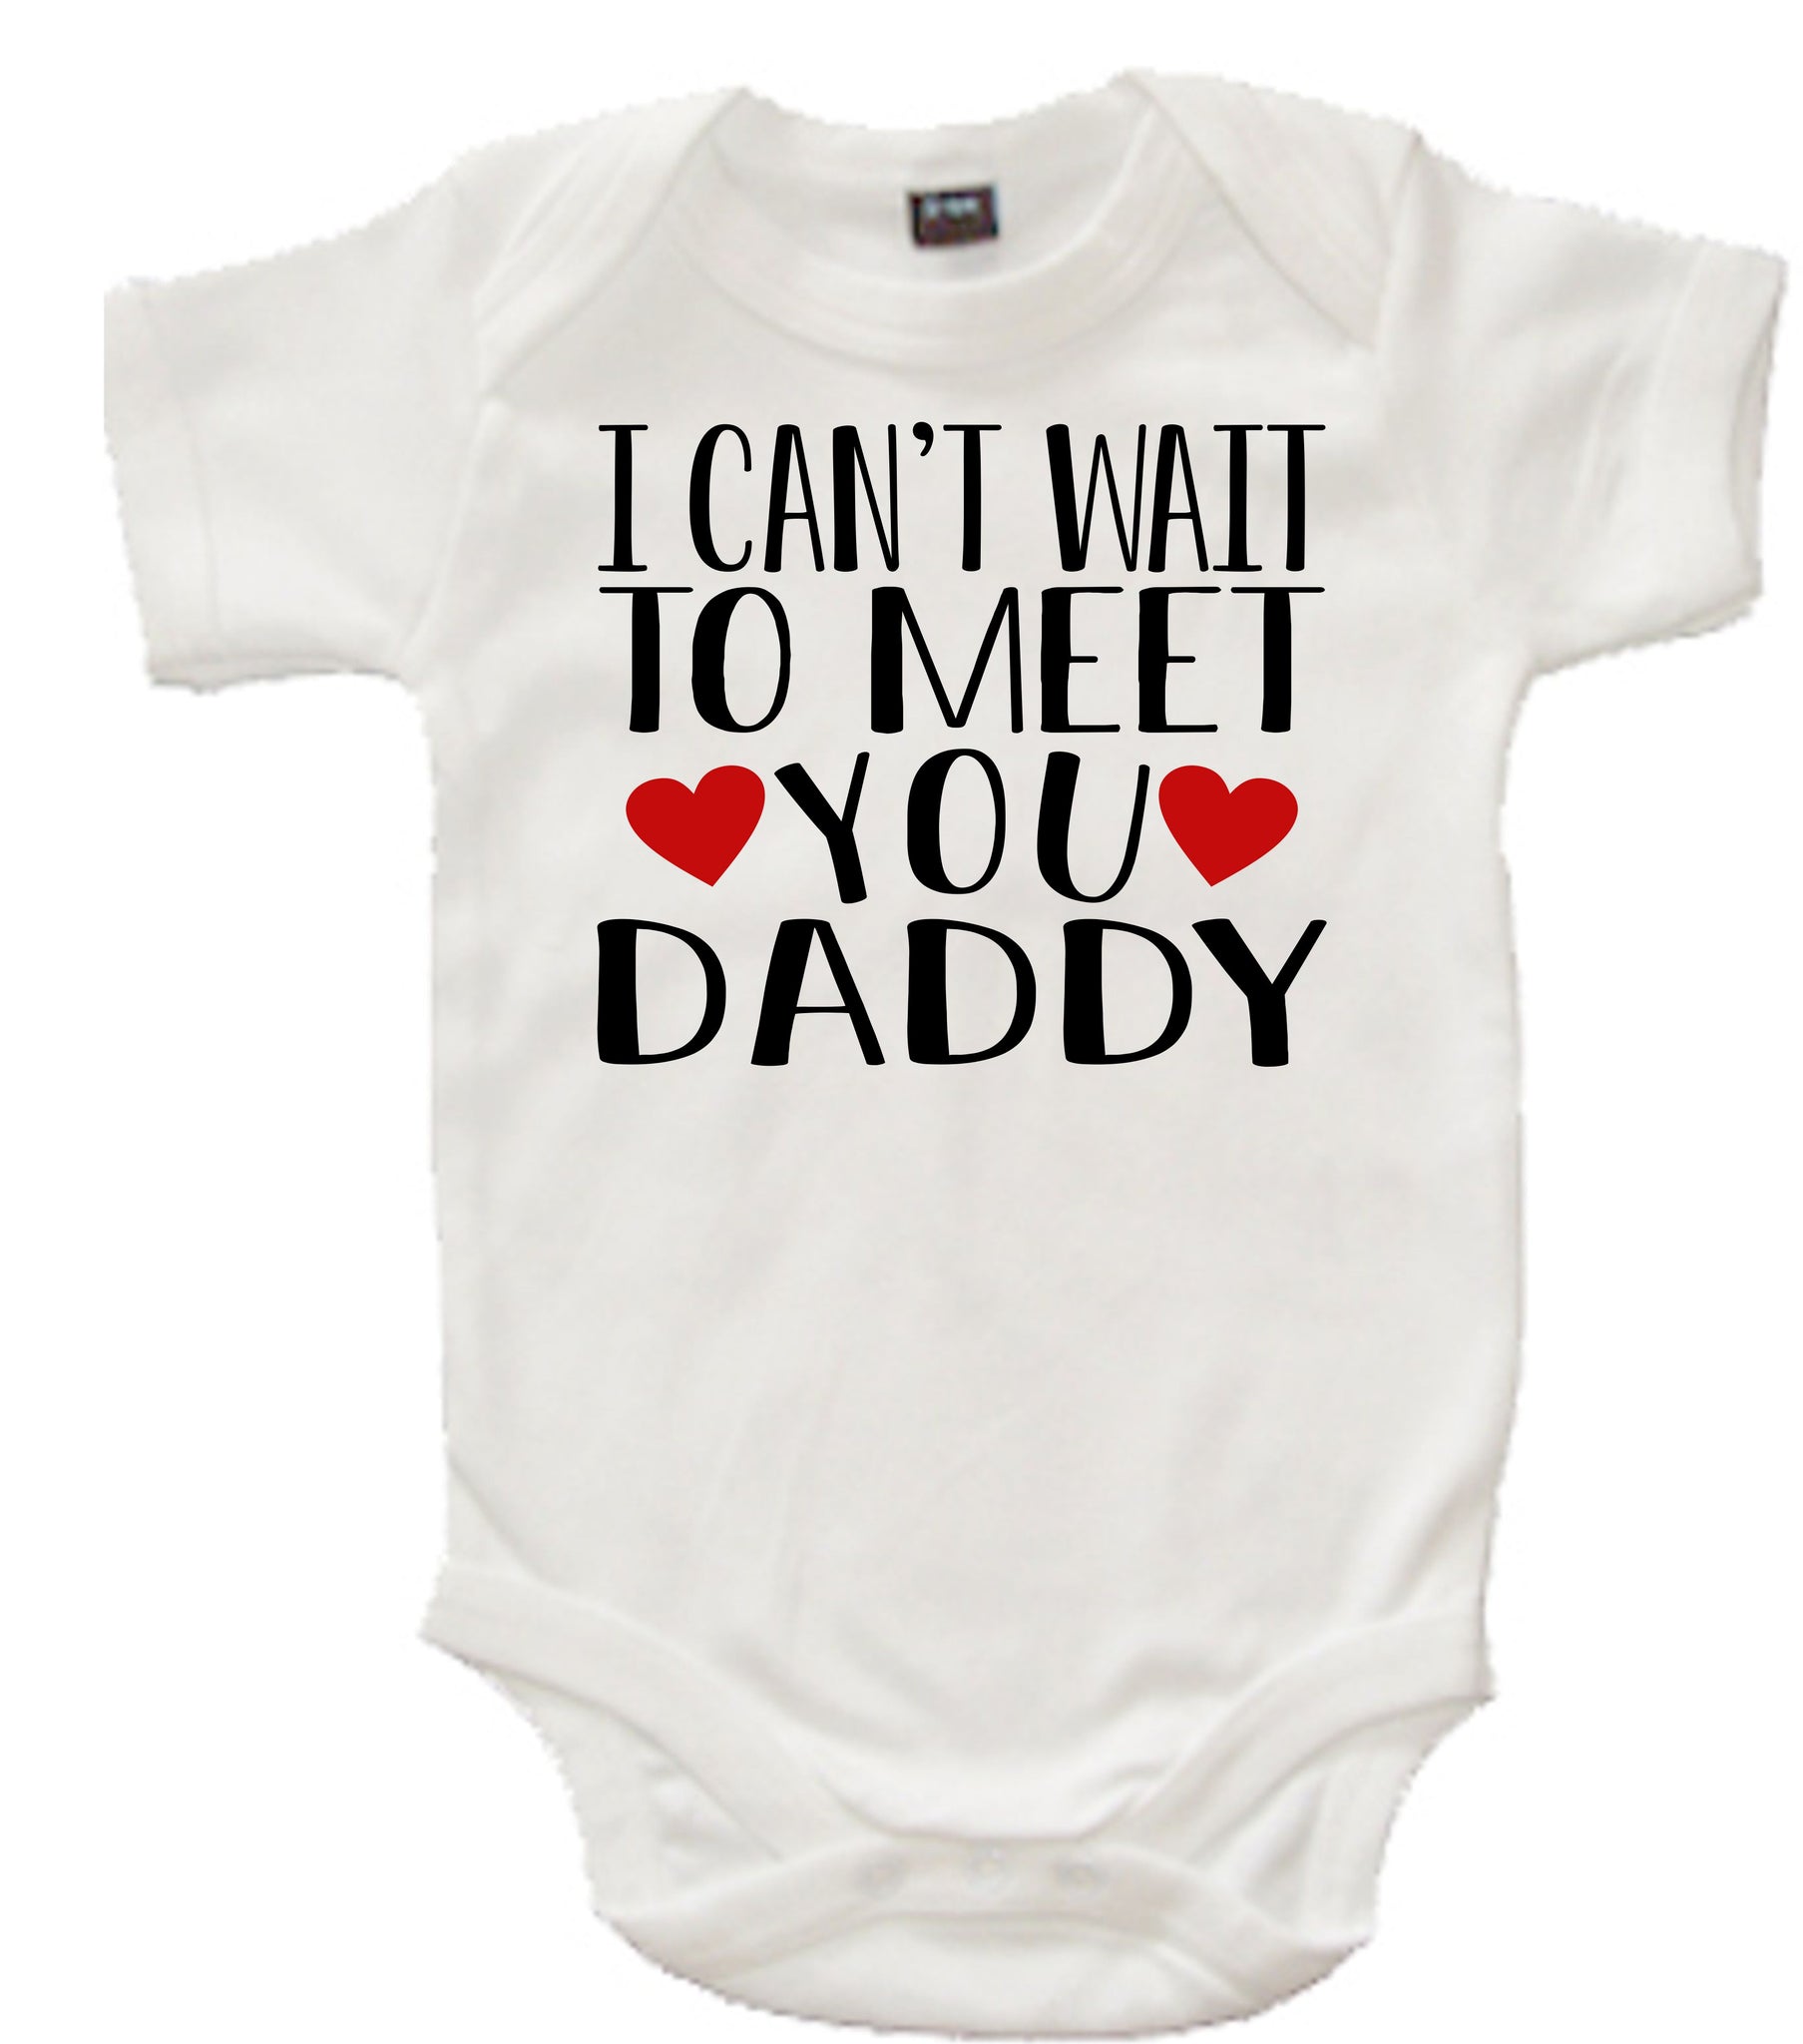 Personalised 'I Can't Wait To Meet You' with heart Baby Bodysuit